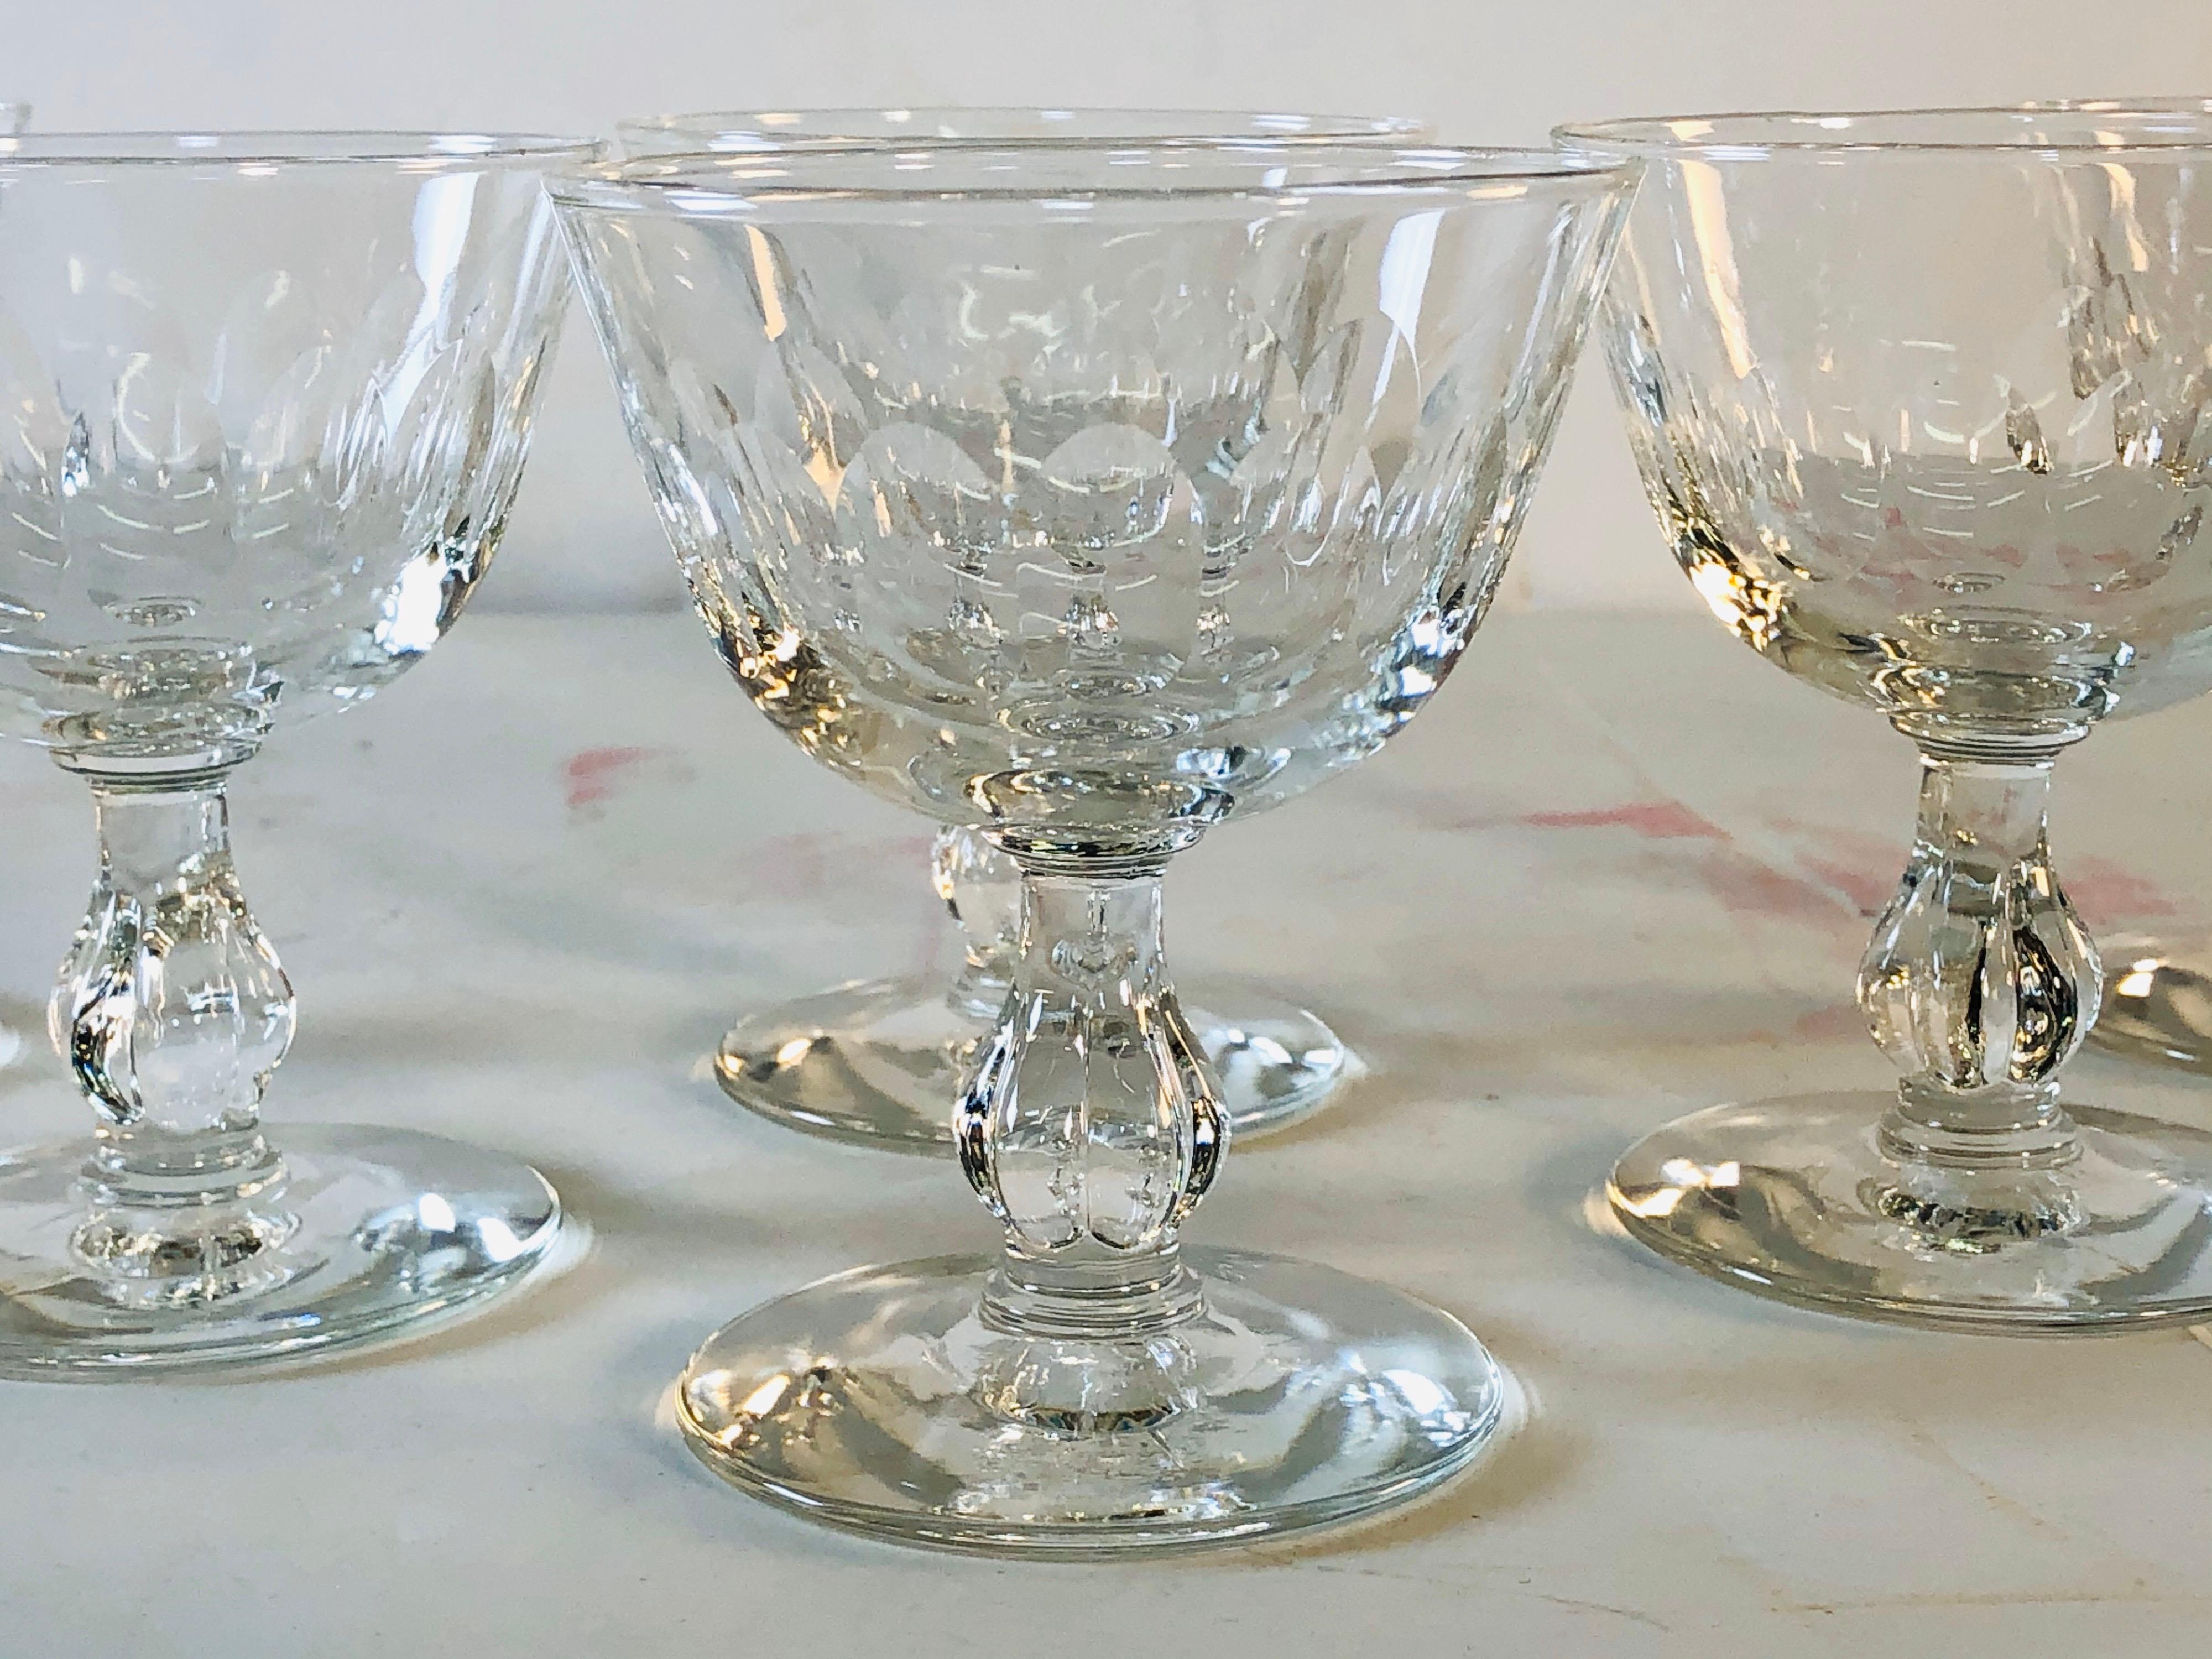 Vintage 1950s set of 6 mitred glass coupe stems. All handcut and polished. No marks. Excellent condition.